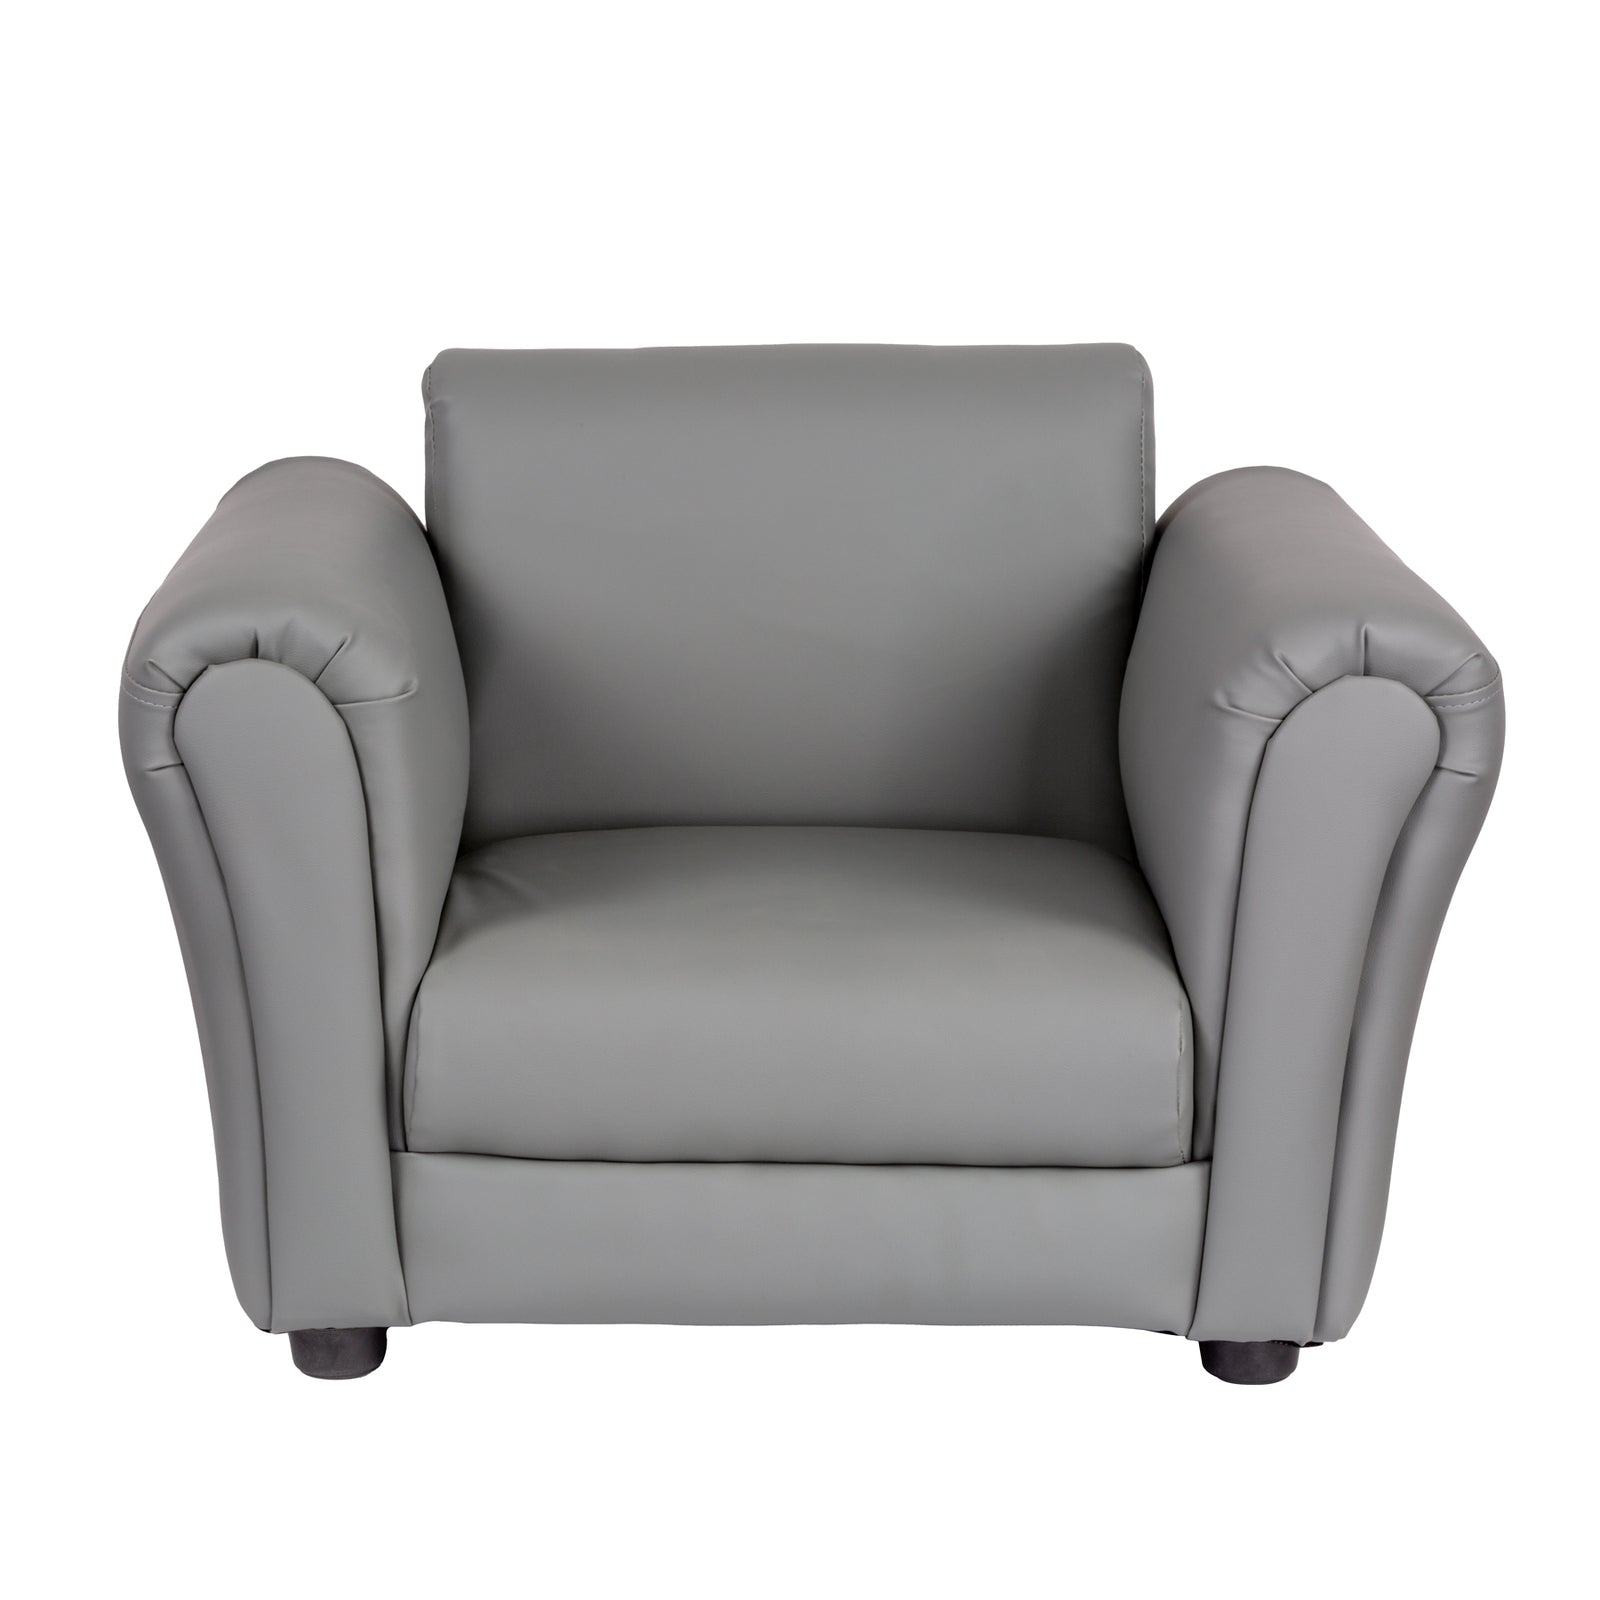 Get Cozy with the Kids' Grey Sofa and Footstool Set